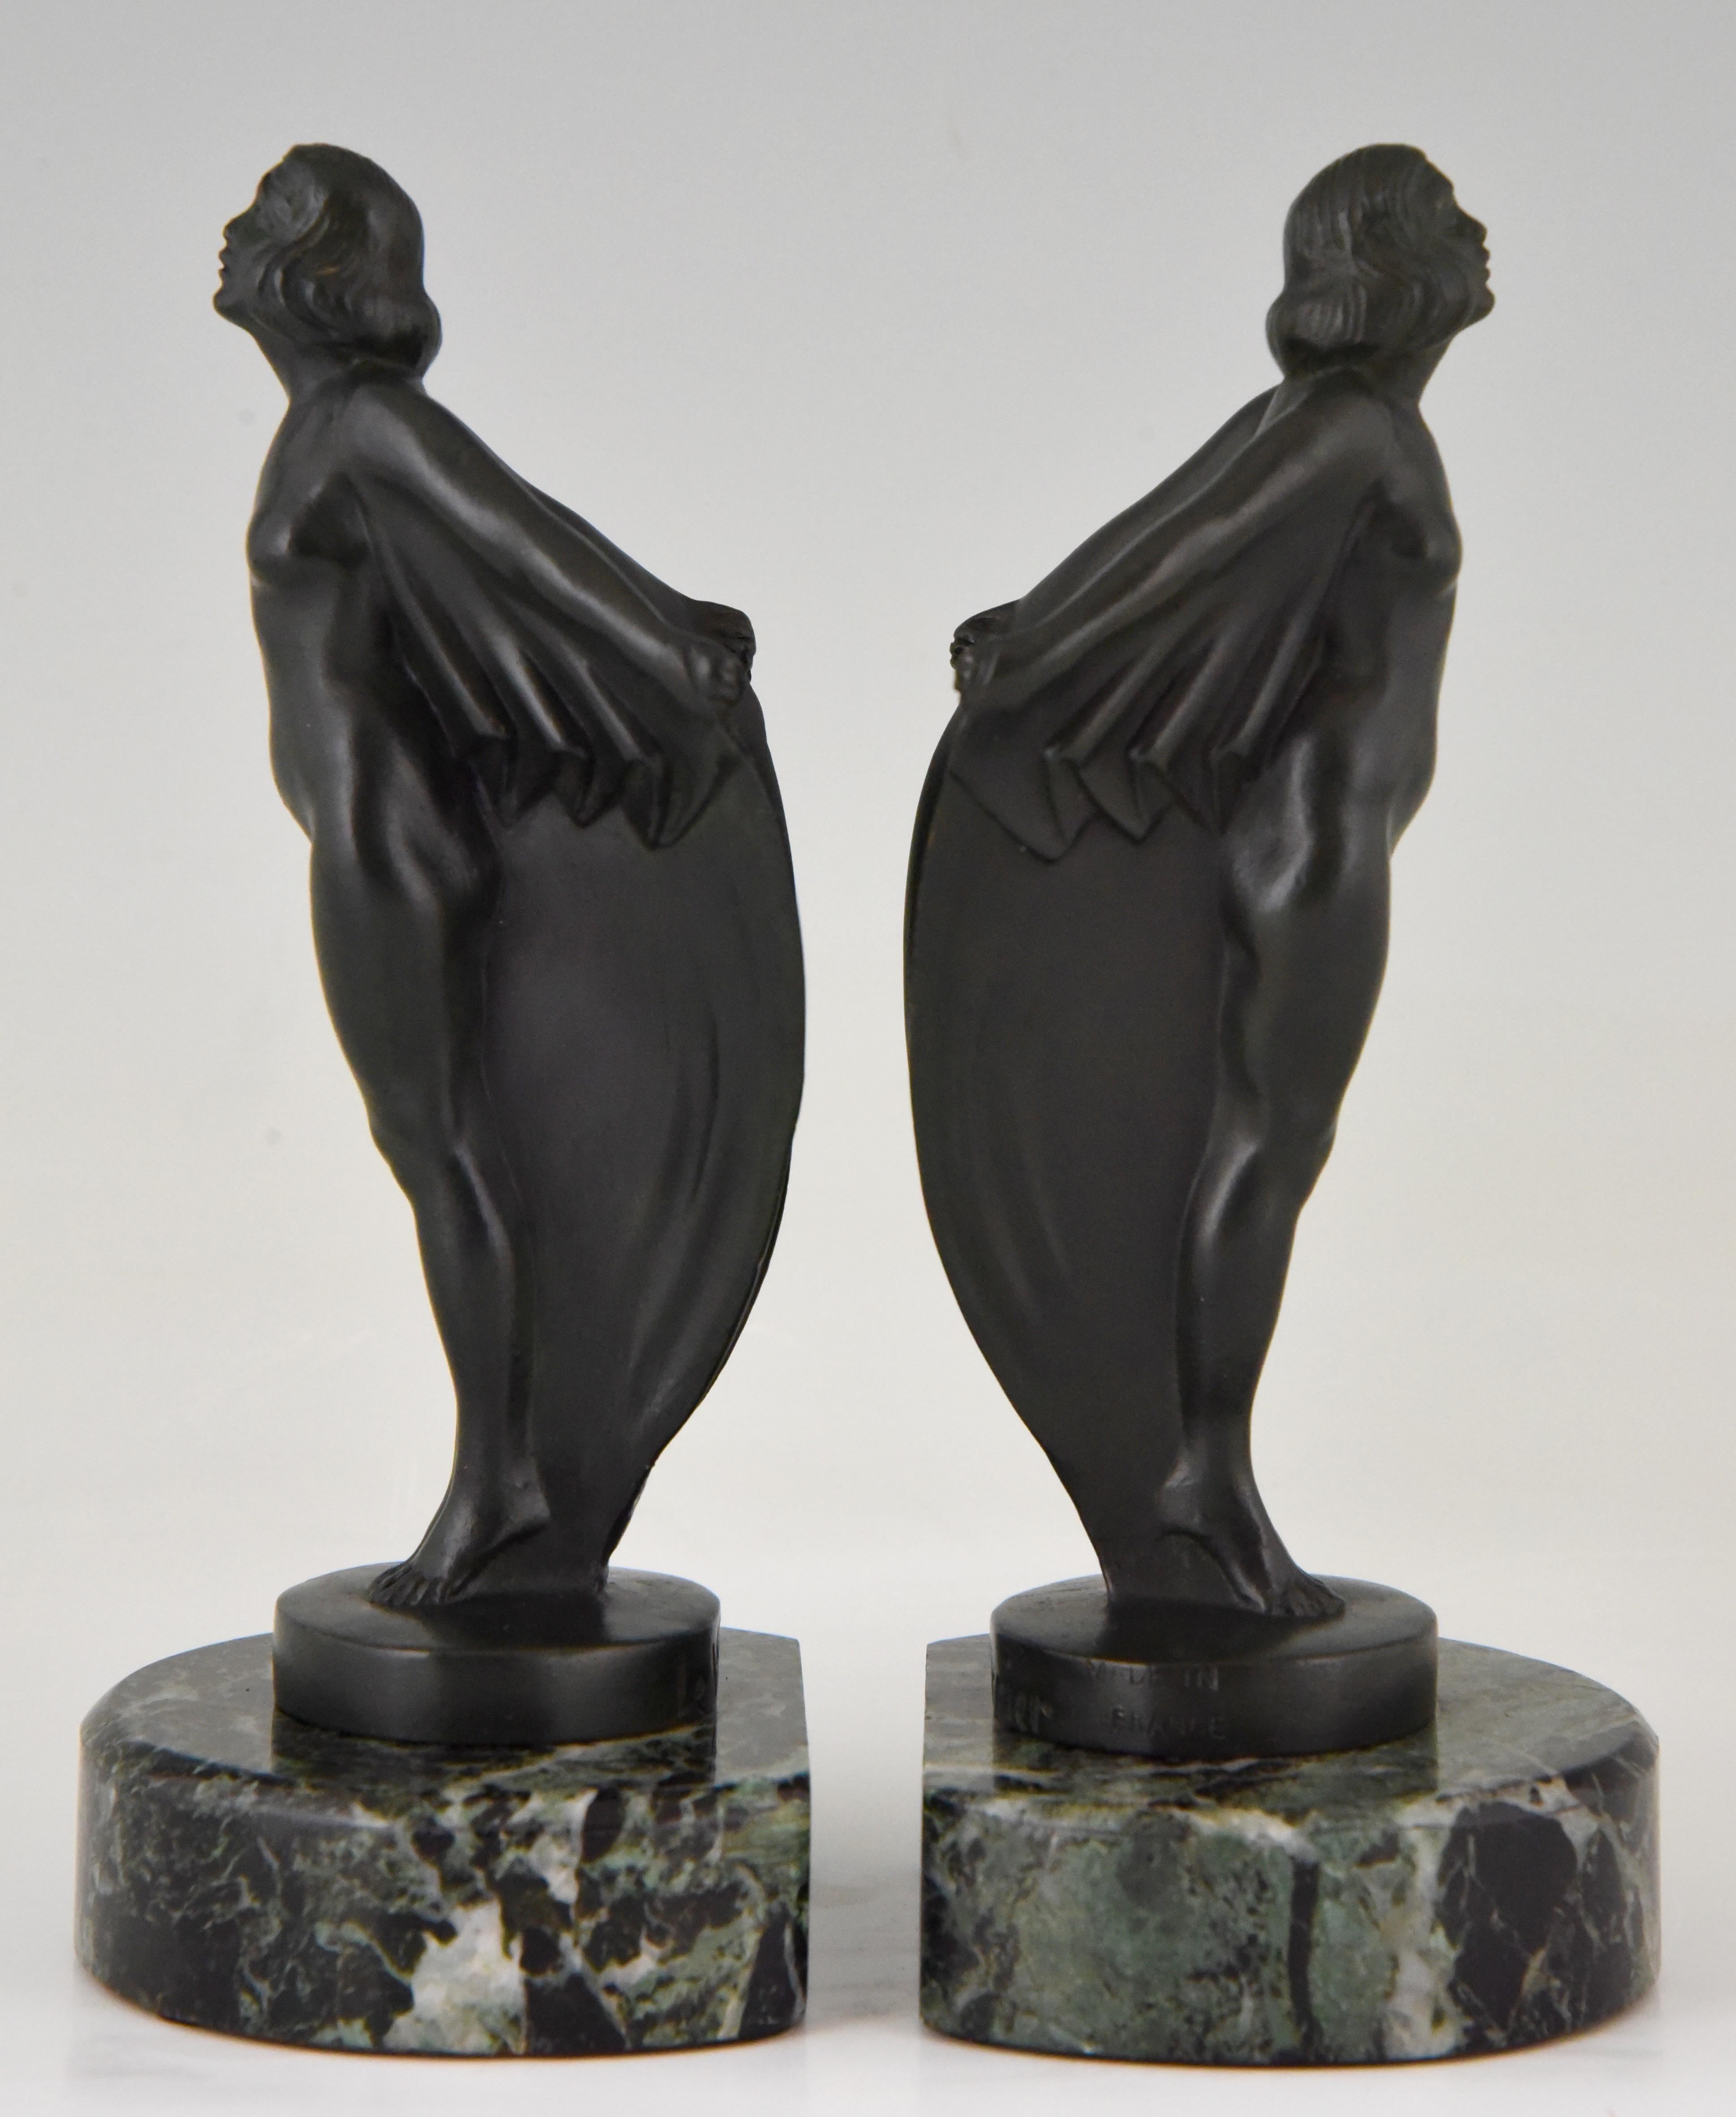 A lovely pair of Art Deco standing nudes with drape by the famous French sculptor Mar Le Verrier. The women are cast in Art metal and have a dark green patina. They are mounted on a green marble base, France, 1930.